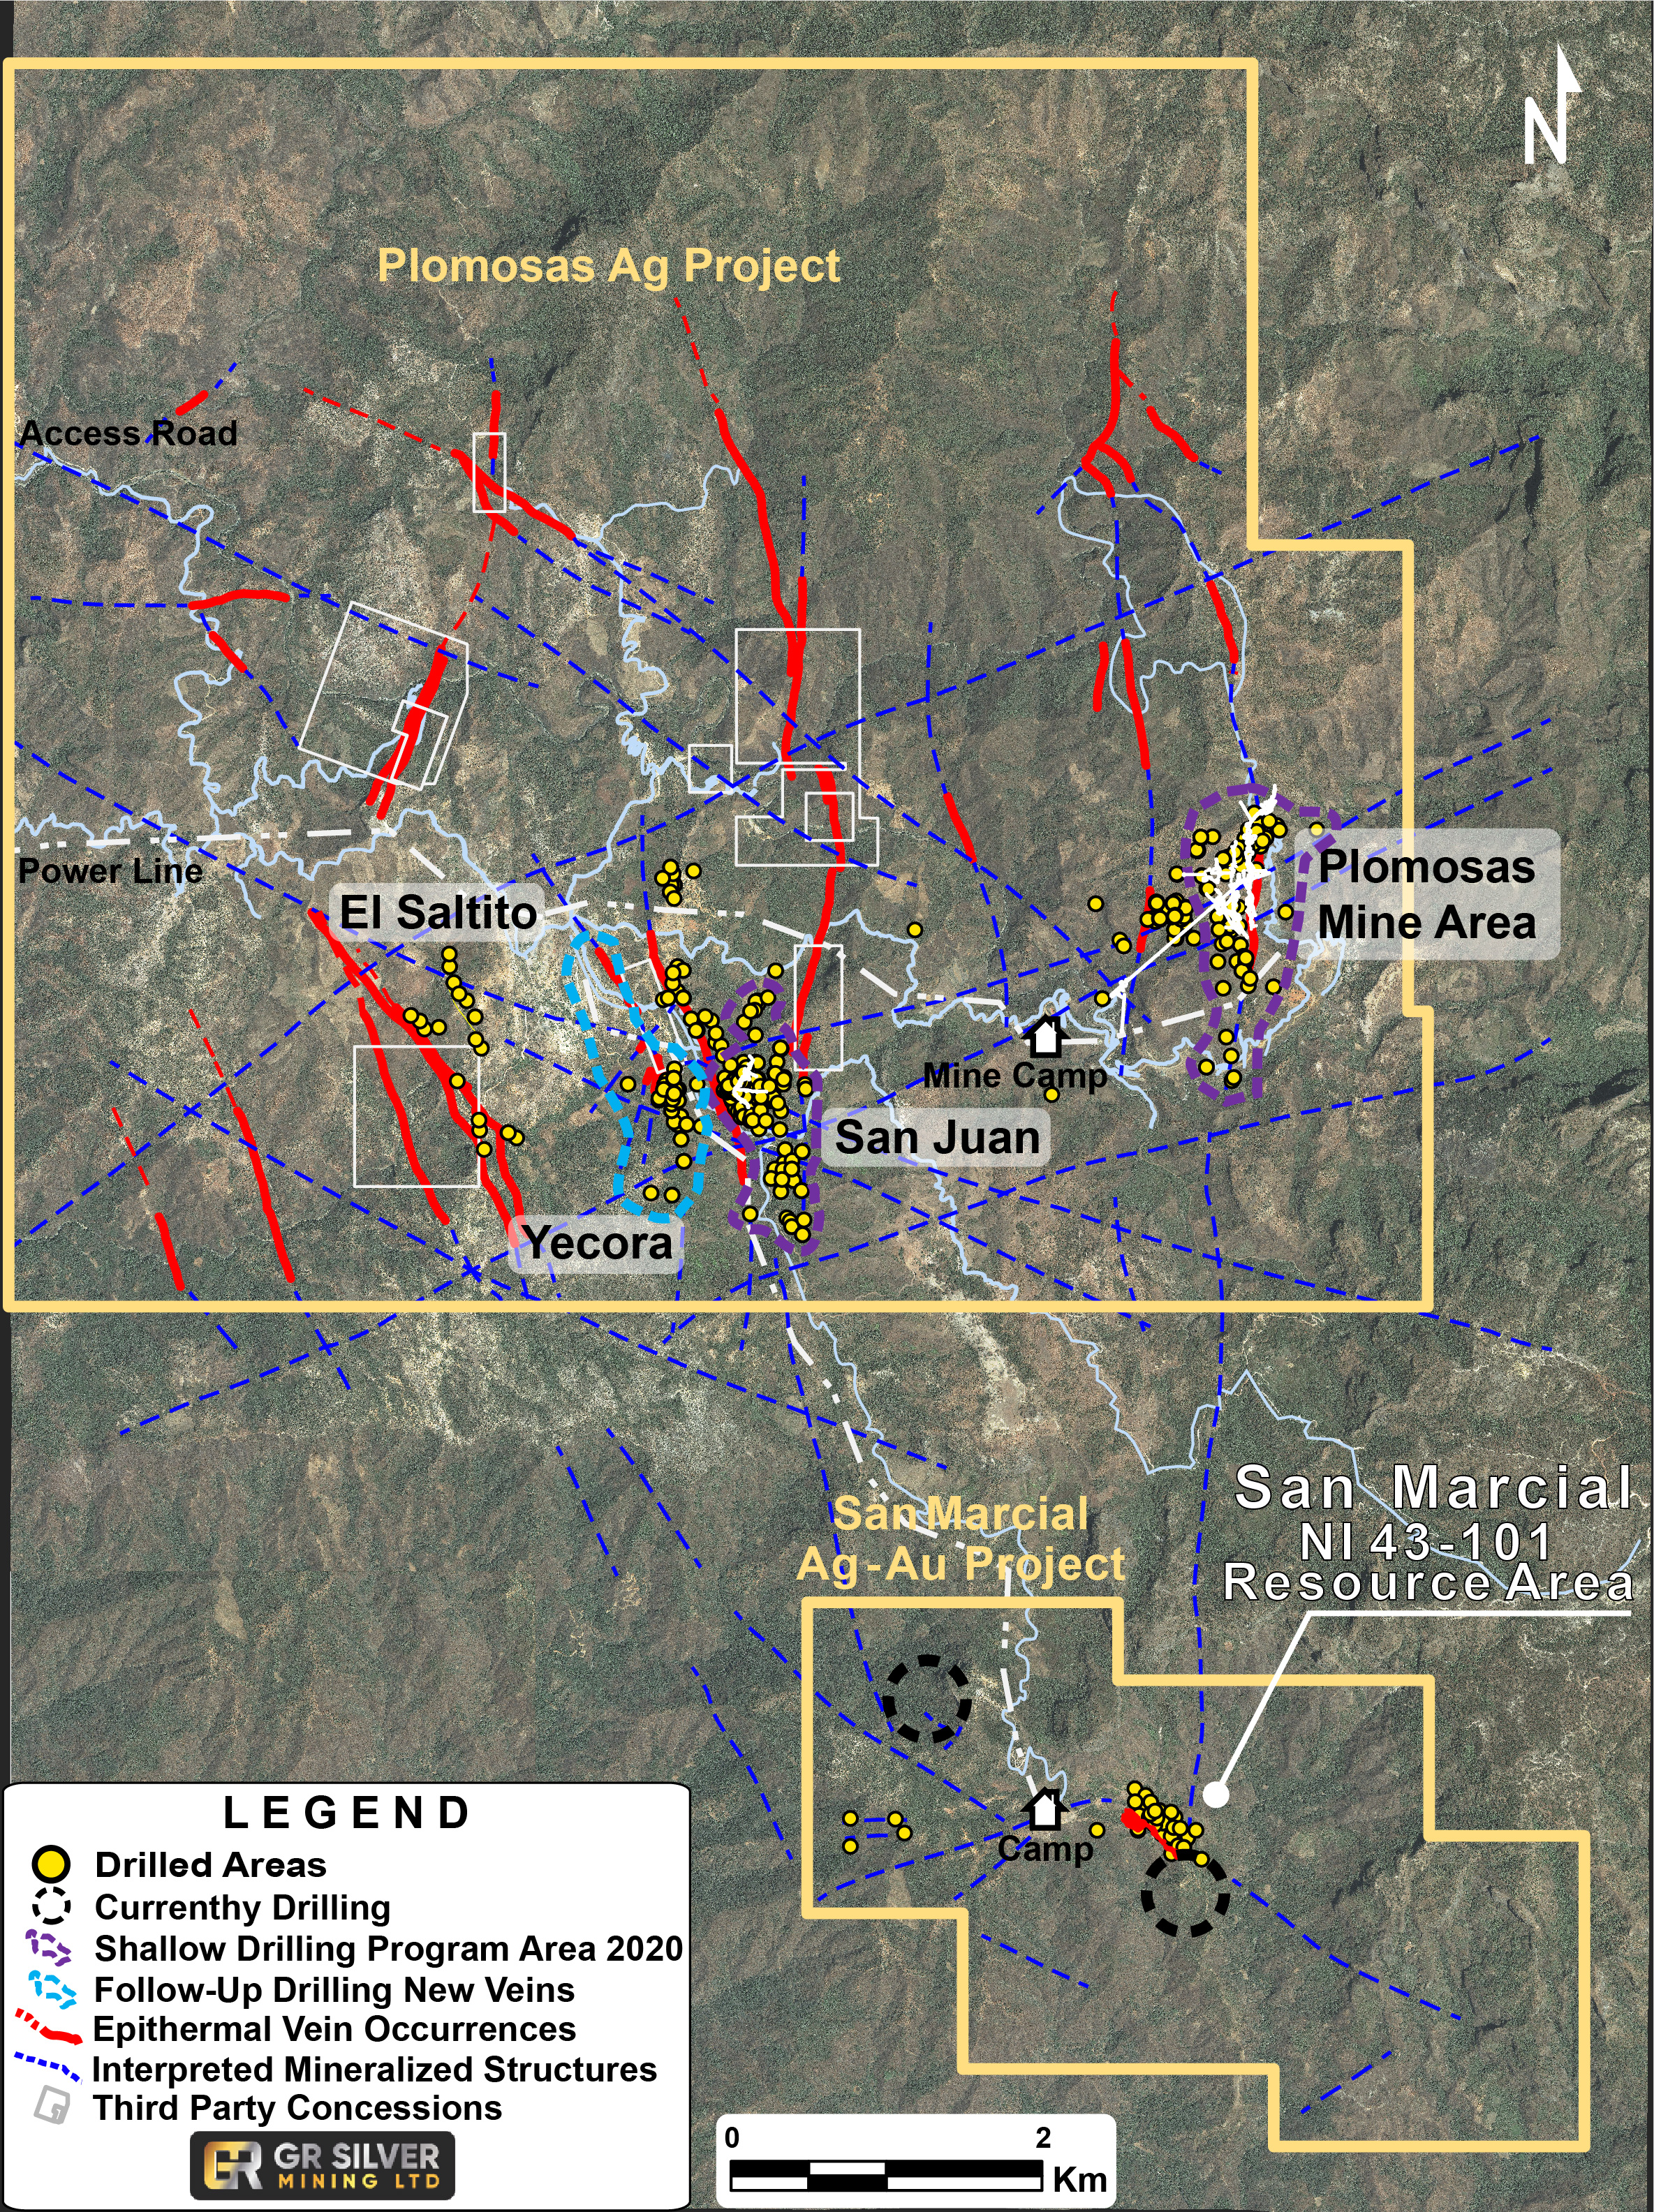 Location of Drilling Areas at the Plomosas and San Marcial Projects